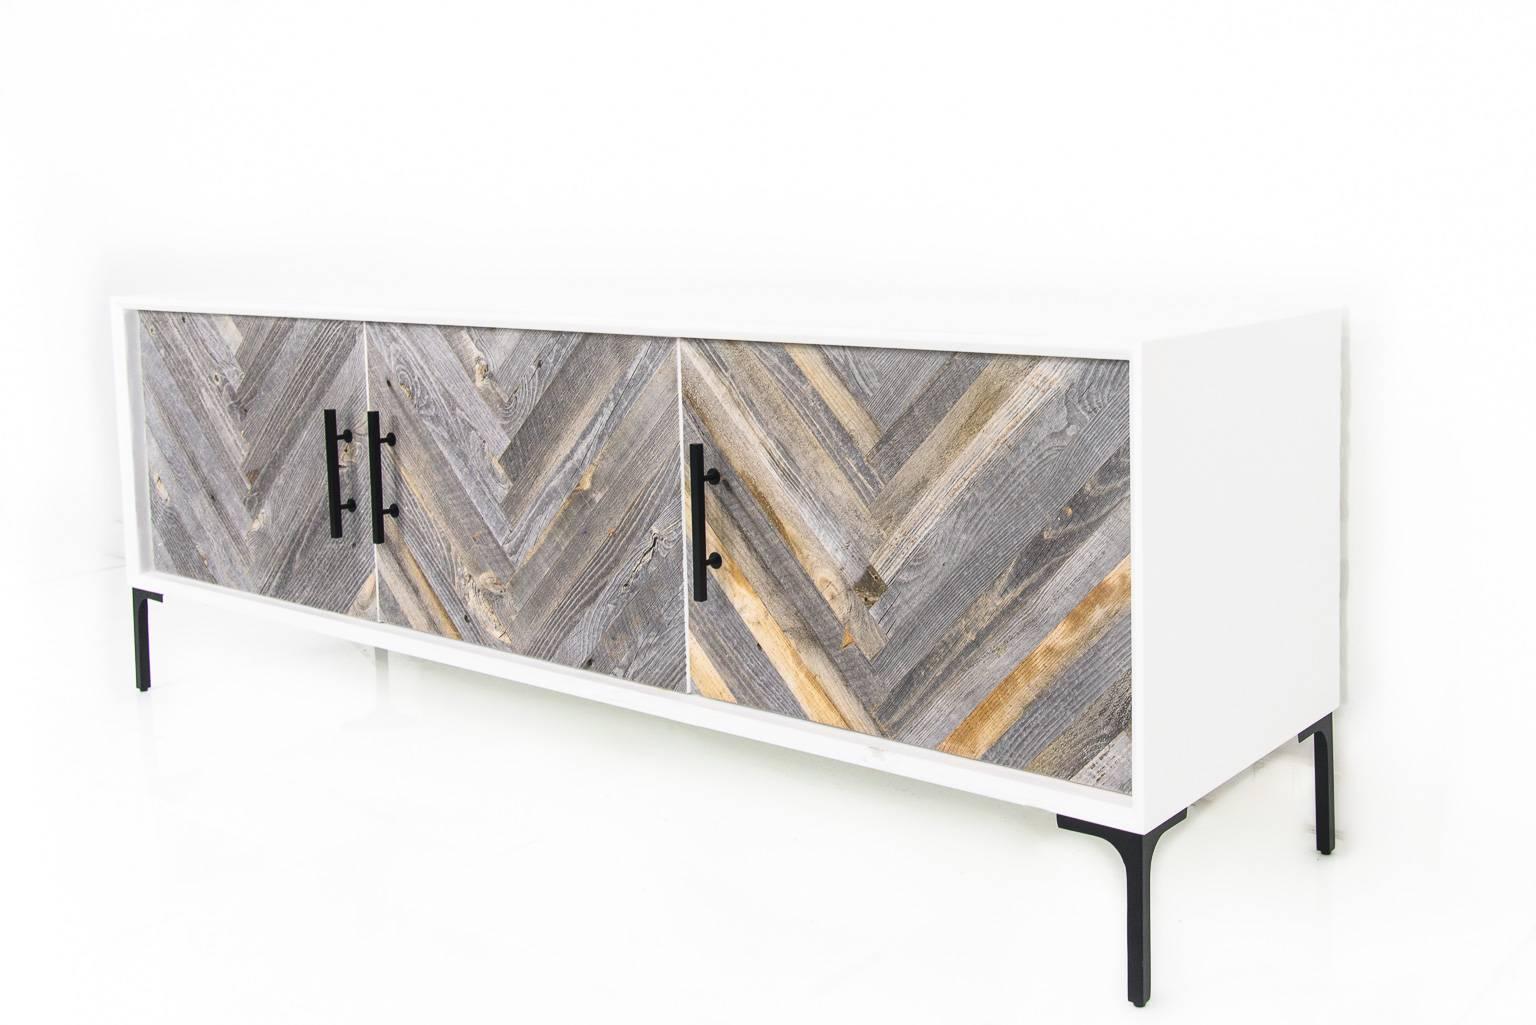 The Amalfi 3 door credenza with recycled wood doors is perfect for any space. Encased in a matte black or white finish, the wood planks on the doors create a large herringbone effect.  

Dimensions:
72